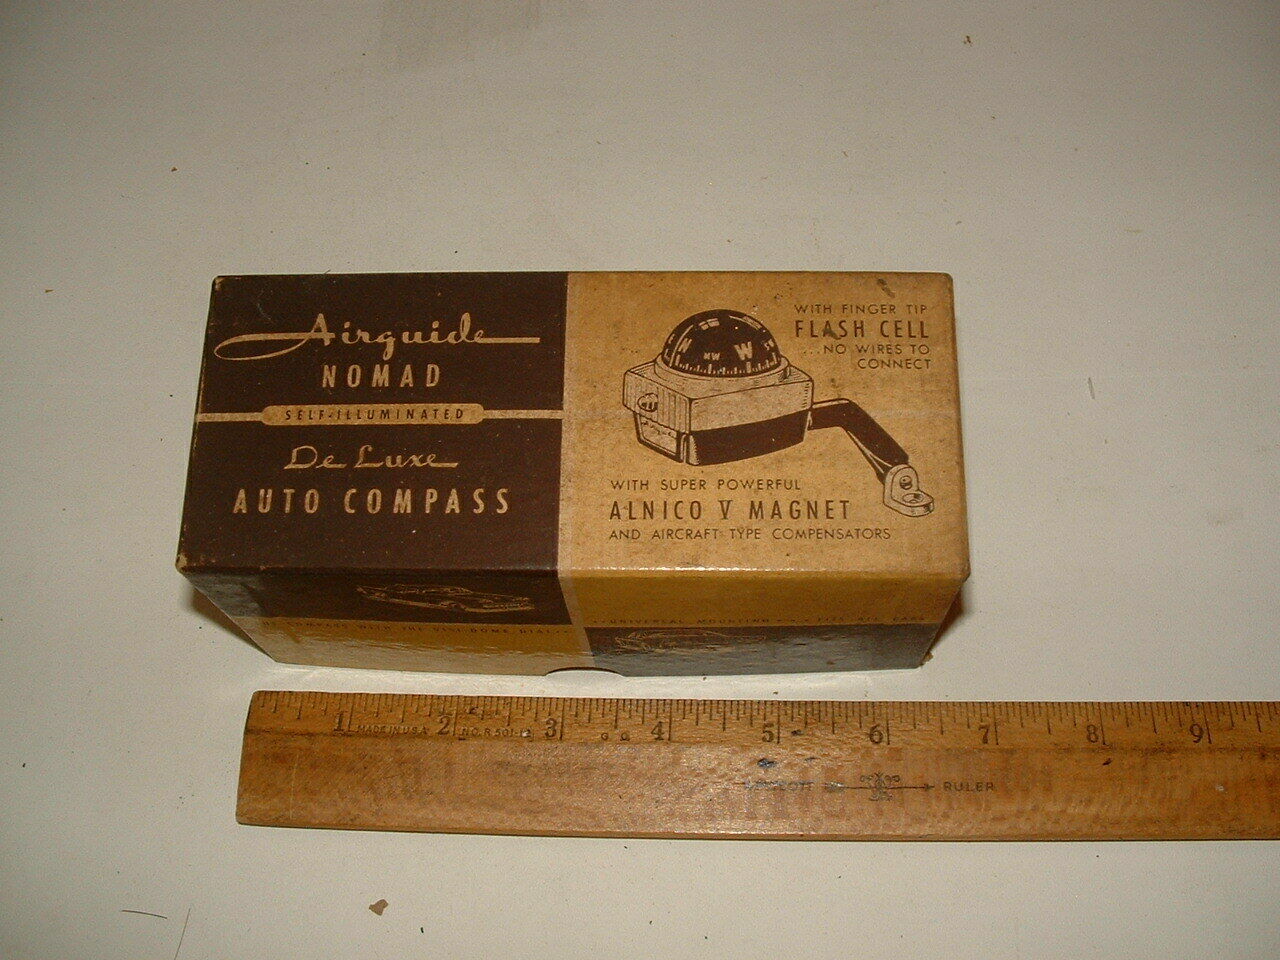 Airguide Nomad, Deluxe Auto Compass. 1950''s